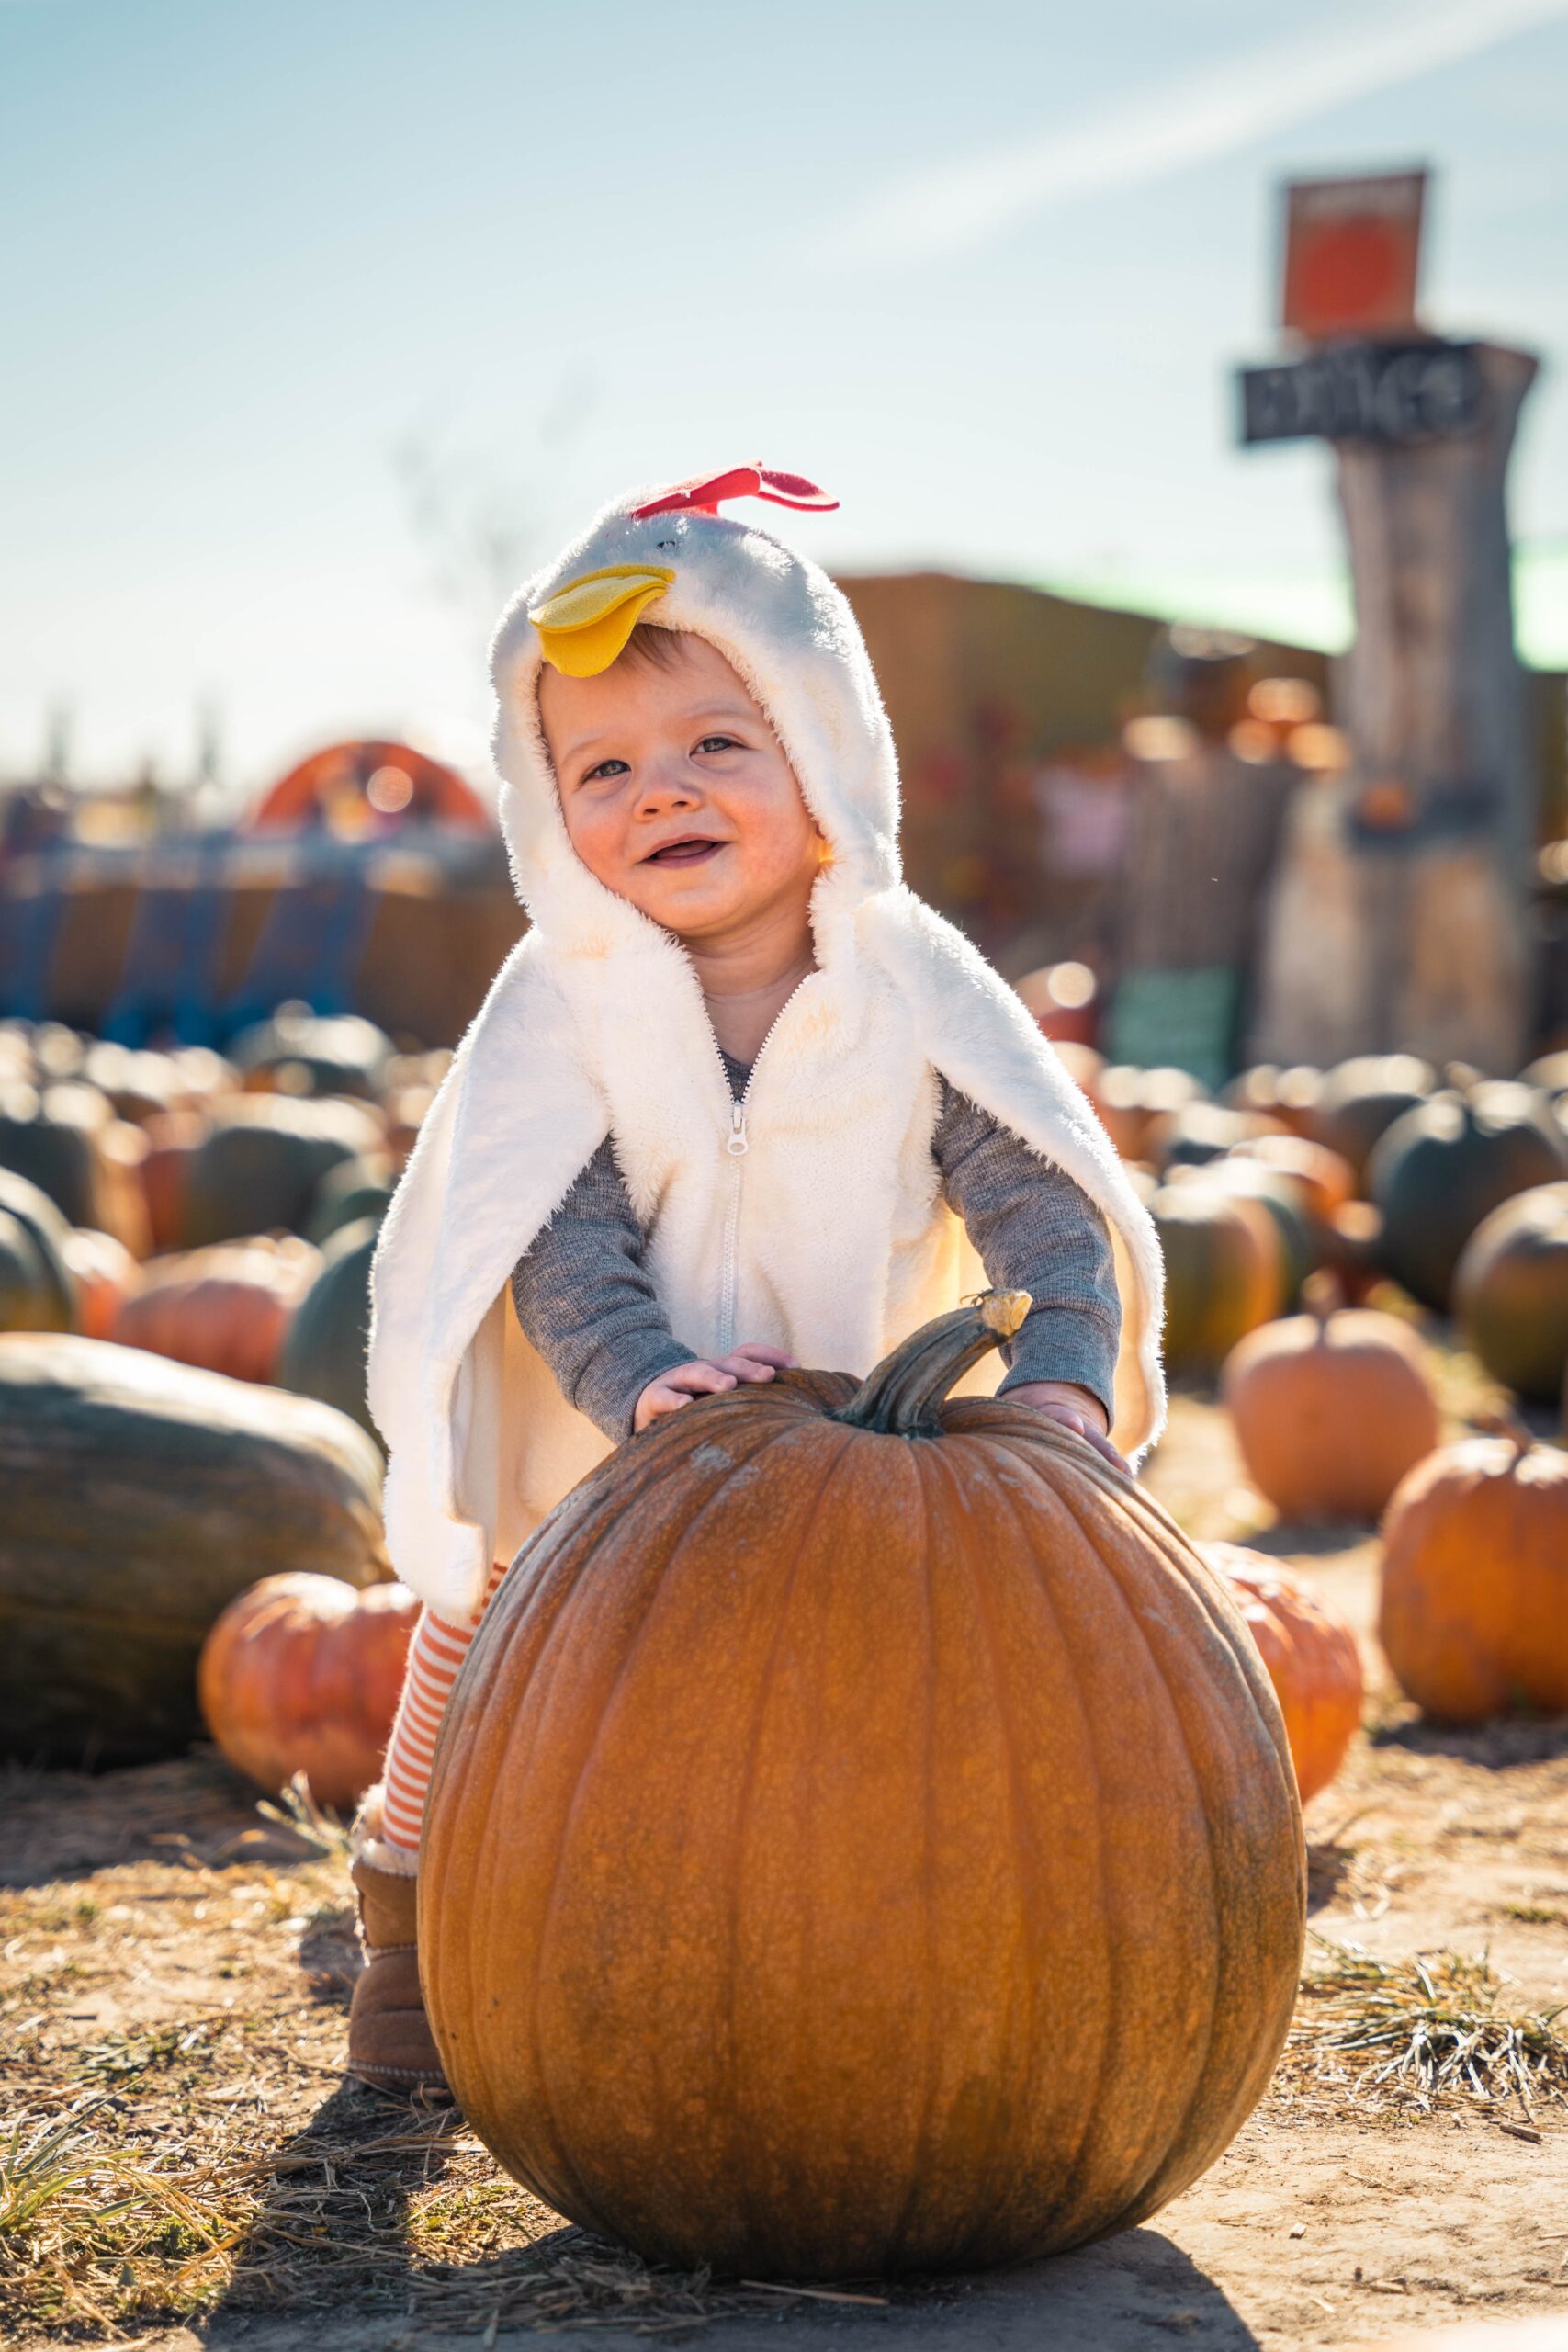 Baby in a costume holding a pumpkin